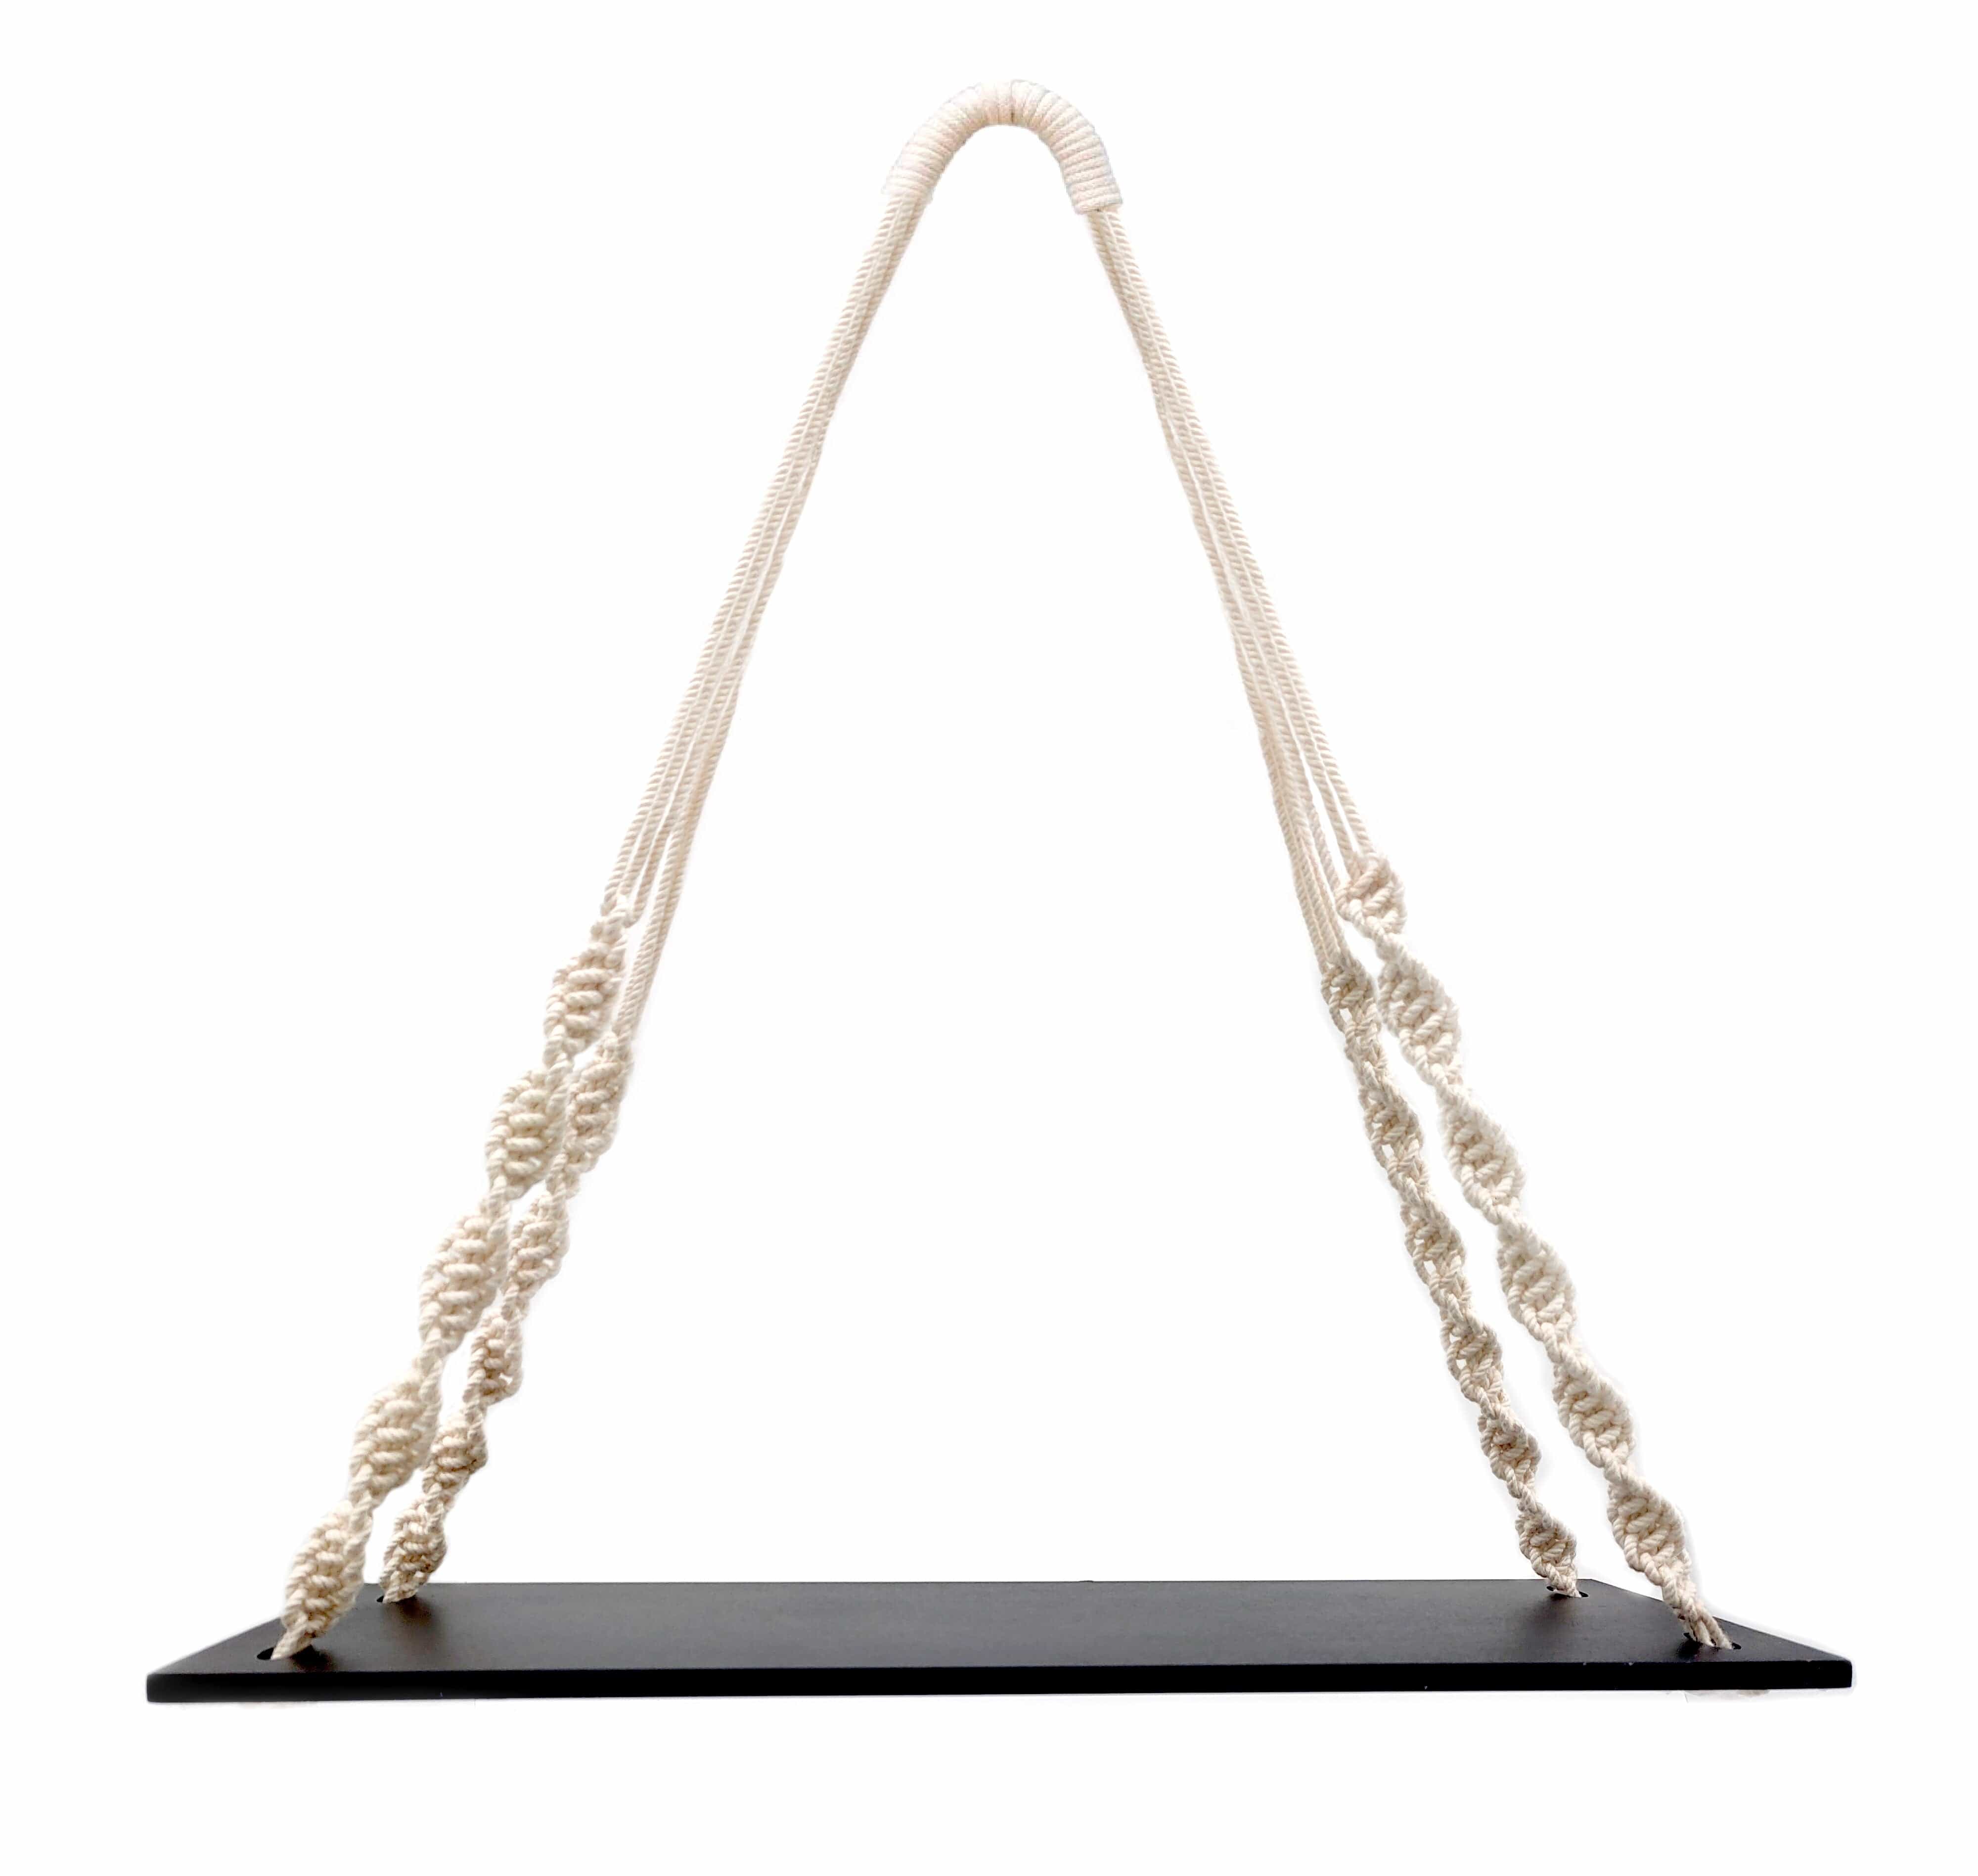 Wooden Wall Hanging Black Shelf With Wall Rustic White Curved Rope